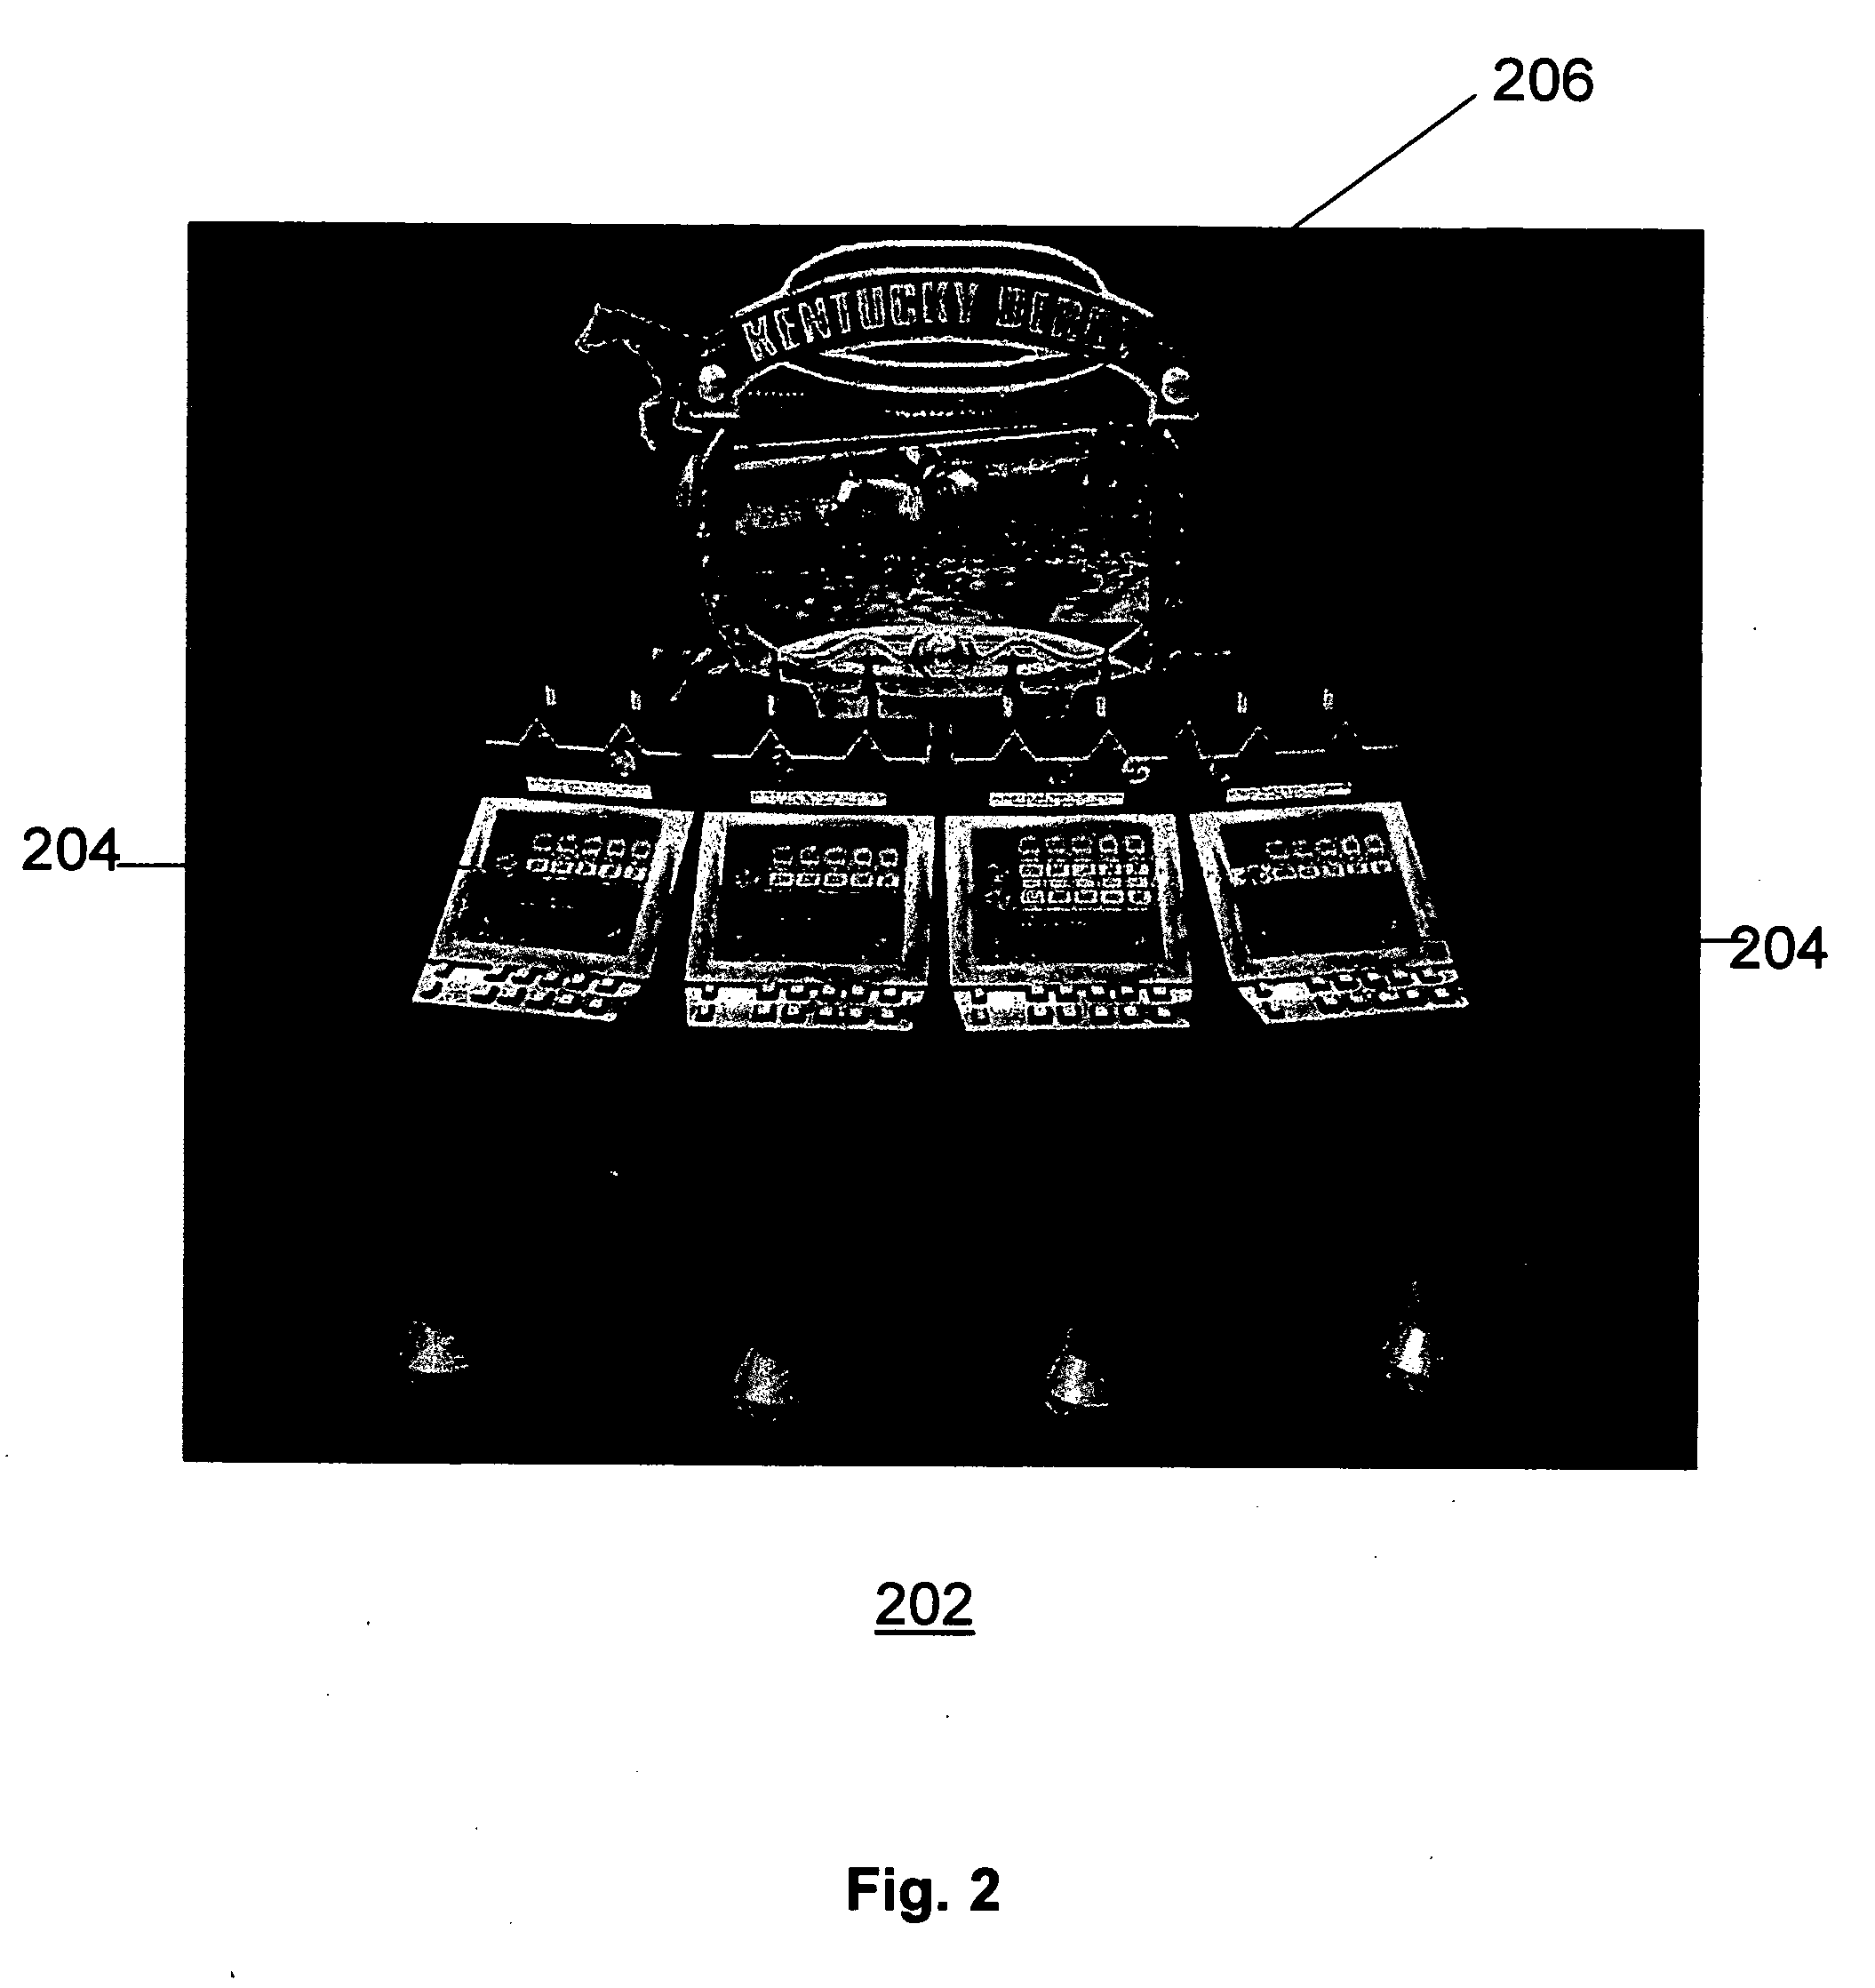 System and method of an interactive multiple participant game